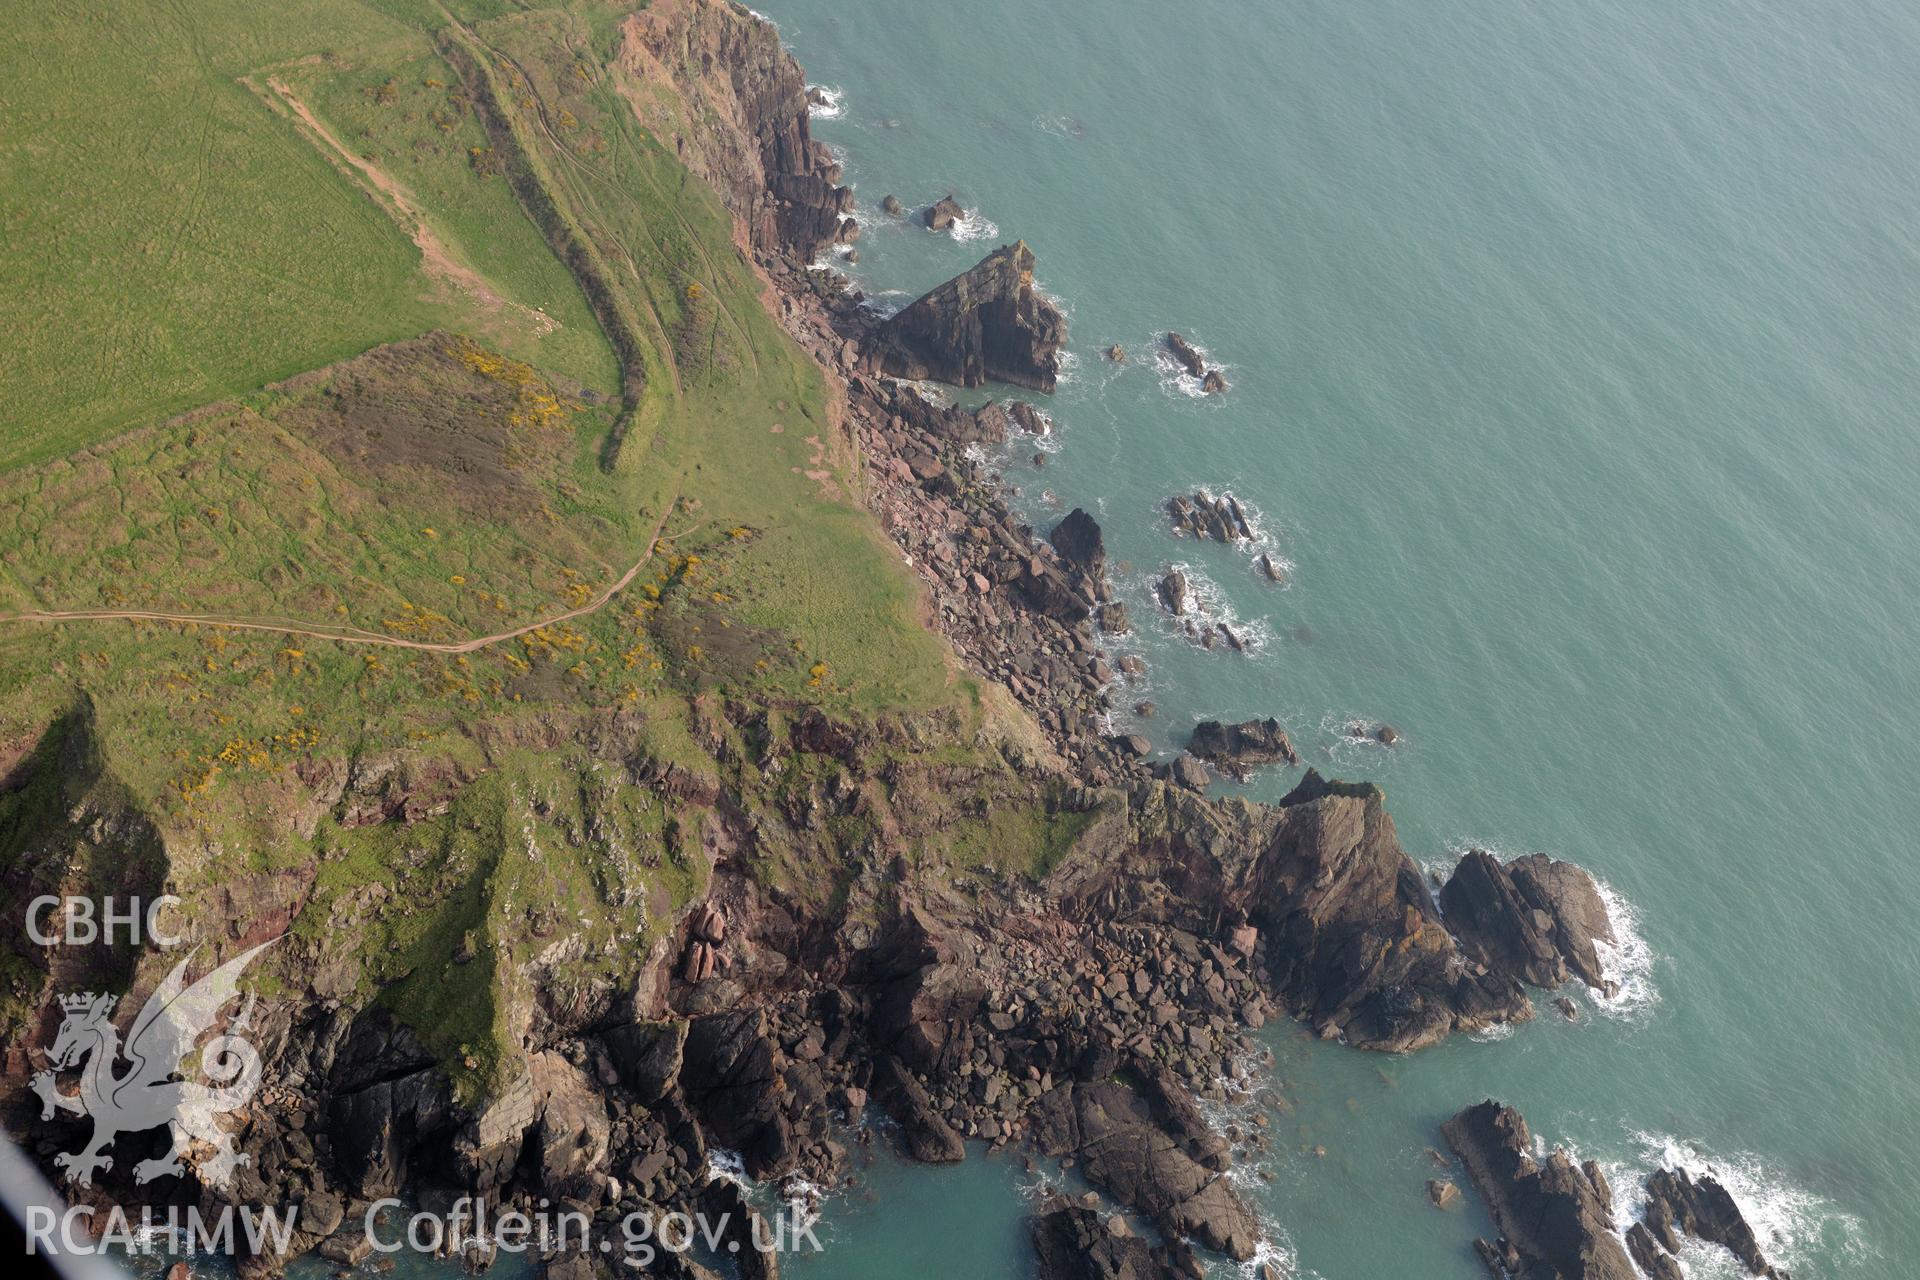 Aerial photography of Little Castle Point taken on 27th March 2017. Baseline aerial reconnaissance survey for the CHERISH Project. ? Crown: CHERISH PROJECT 2017. Produced with EU funds through the Ireland Wales Co-operation Programme 2014-2020. All material made freely available through the Open Government Licence.